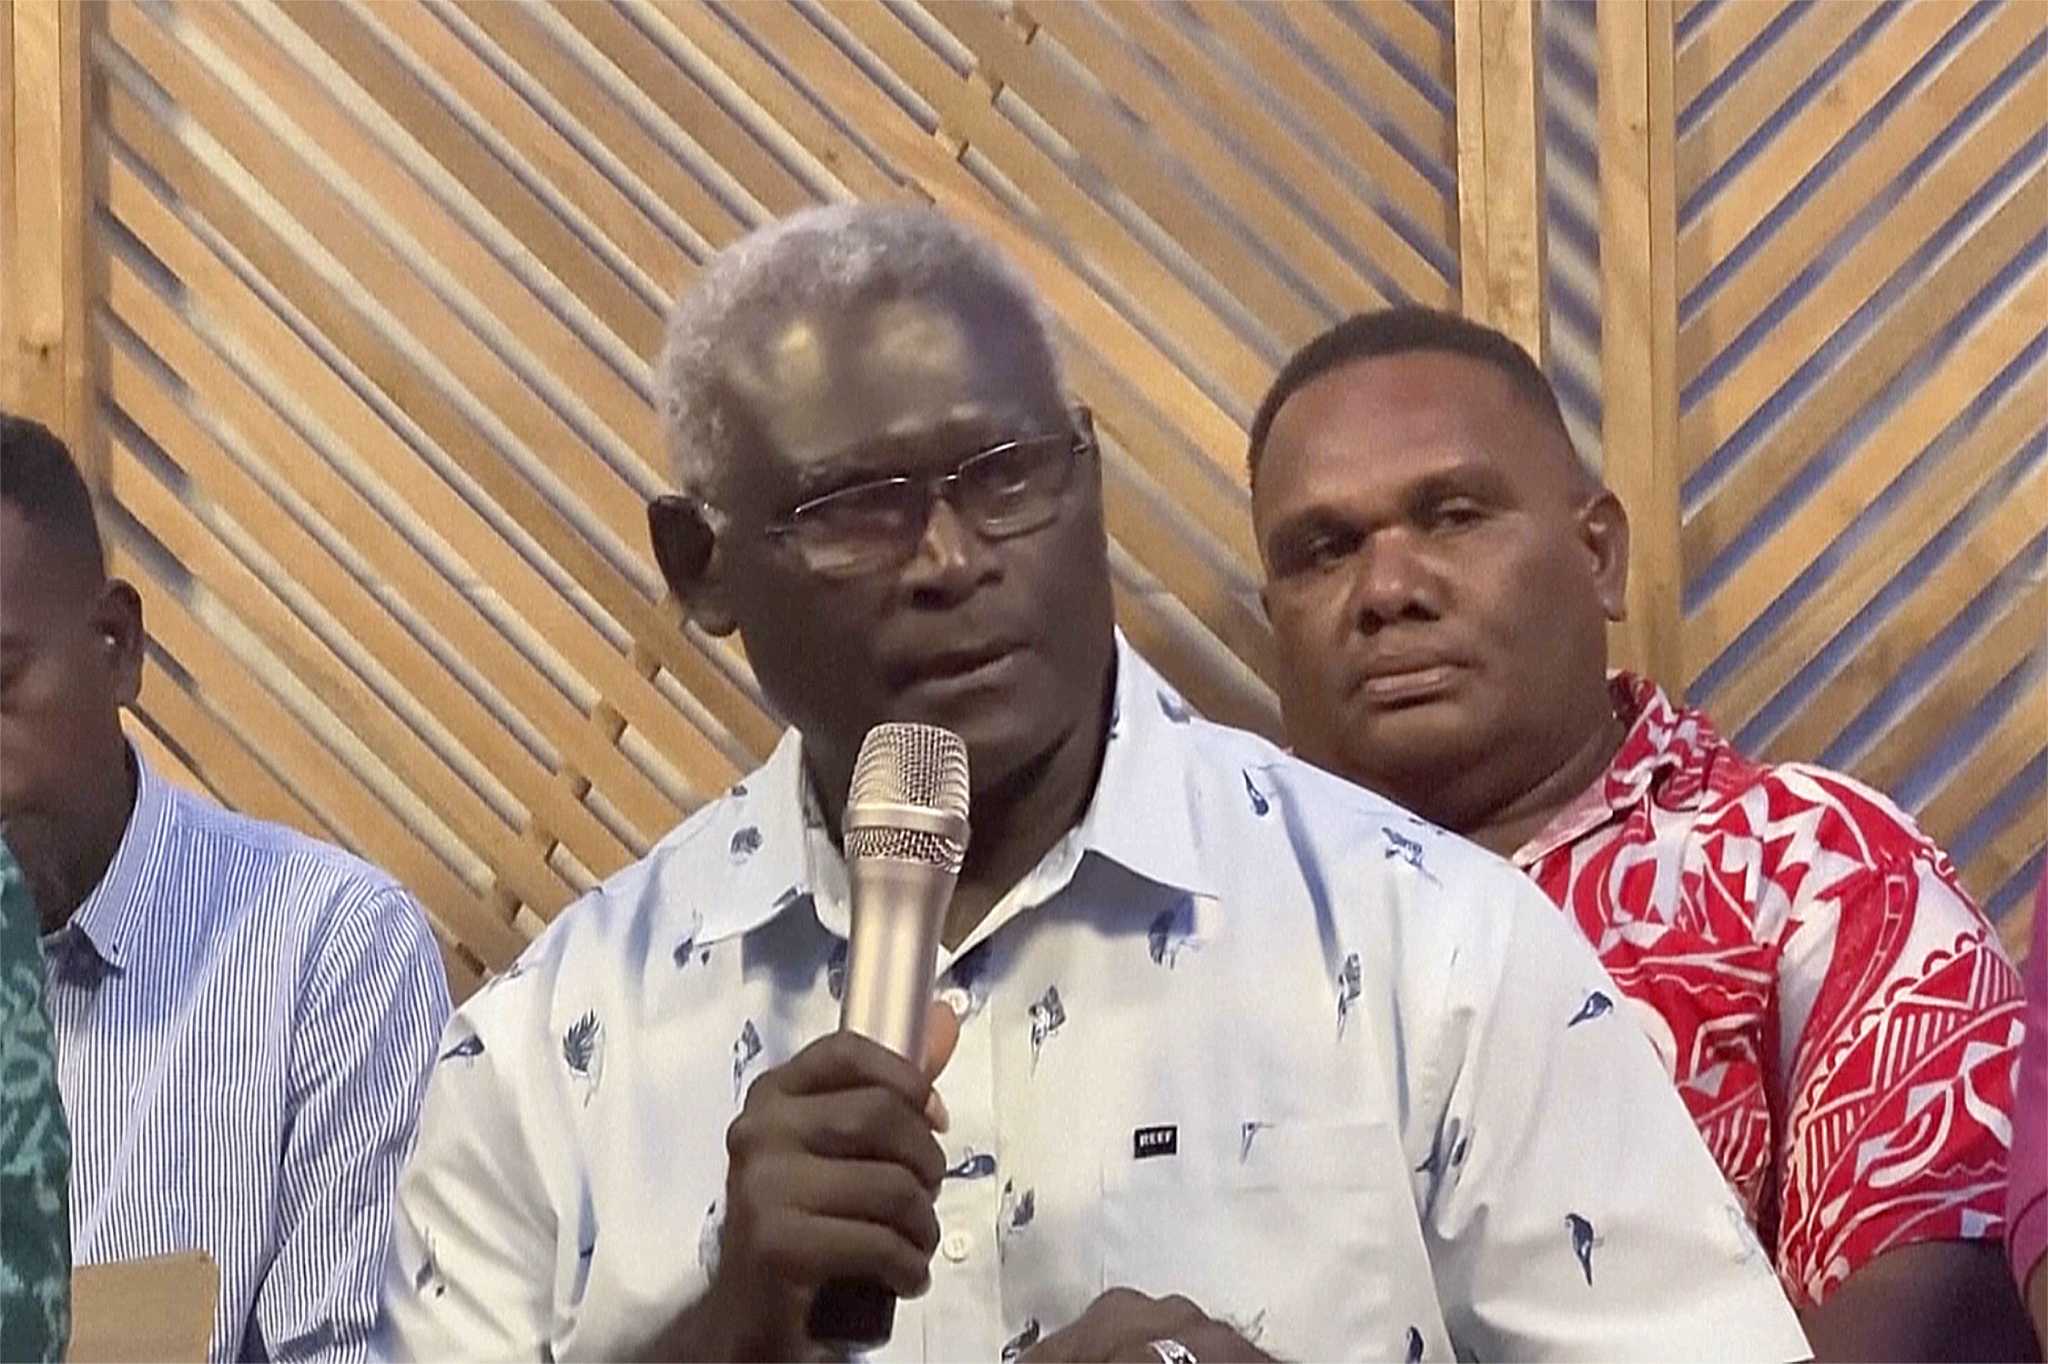 Solomon Islands pro-Beijing prime minister won't keep his job following elections